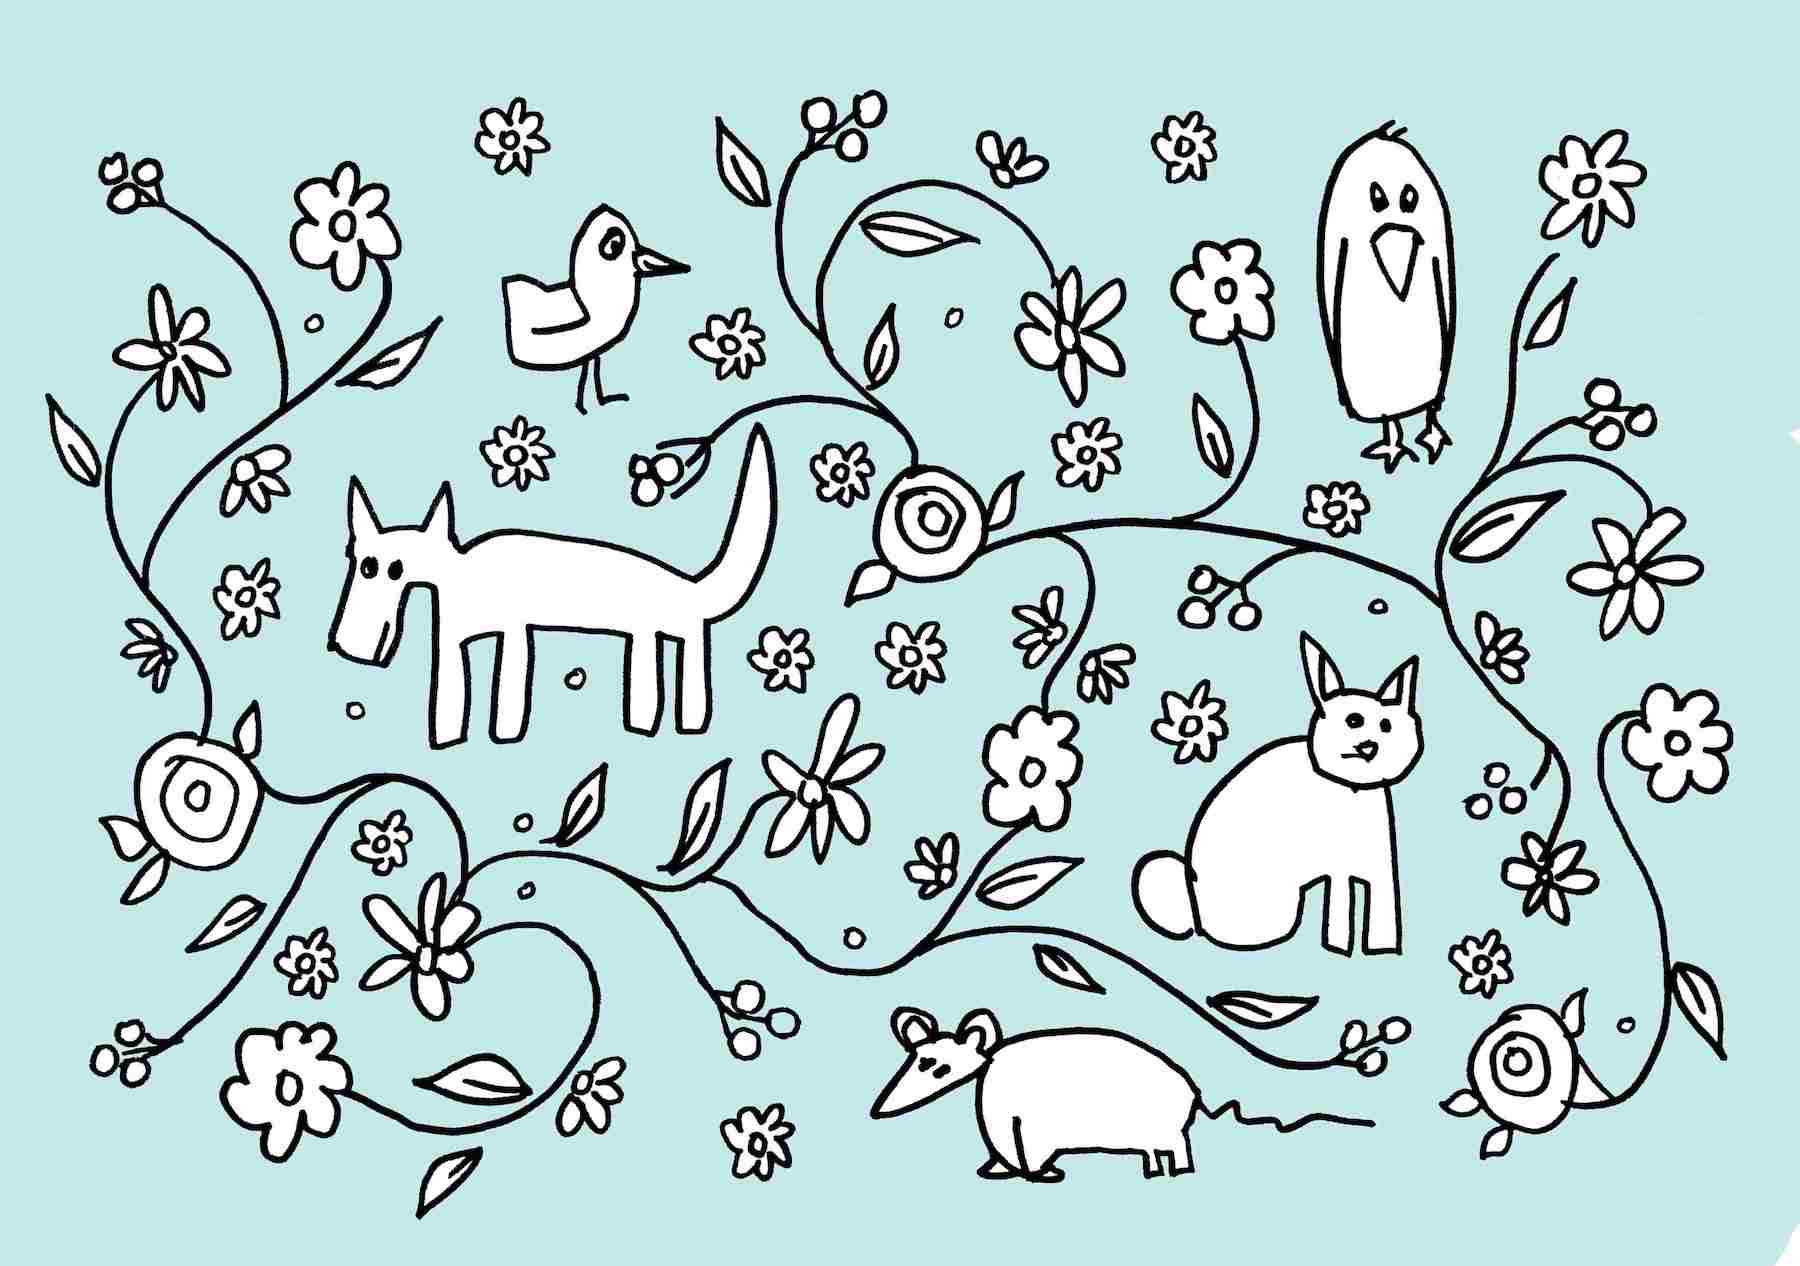 art every day number 686 pattern illustration animal flowers